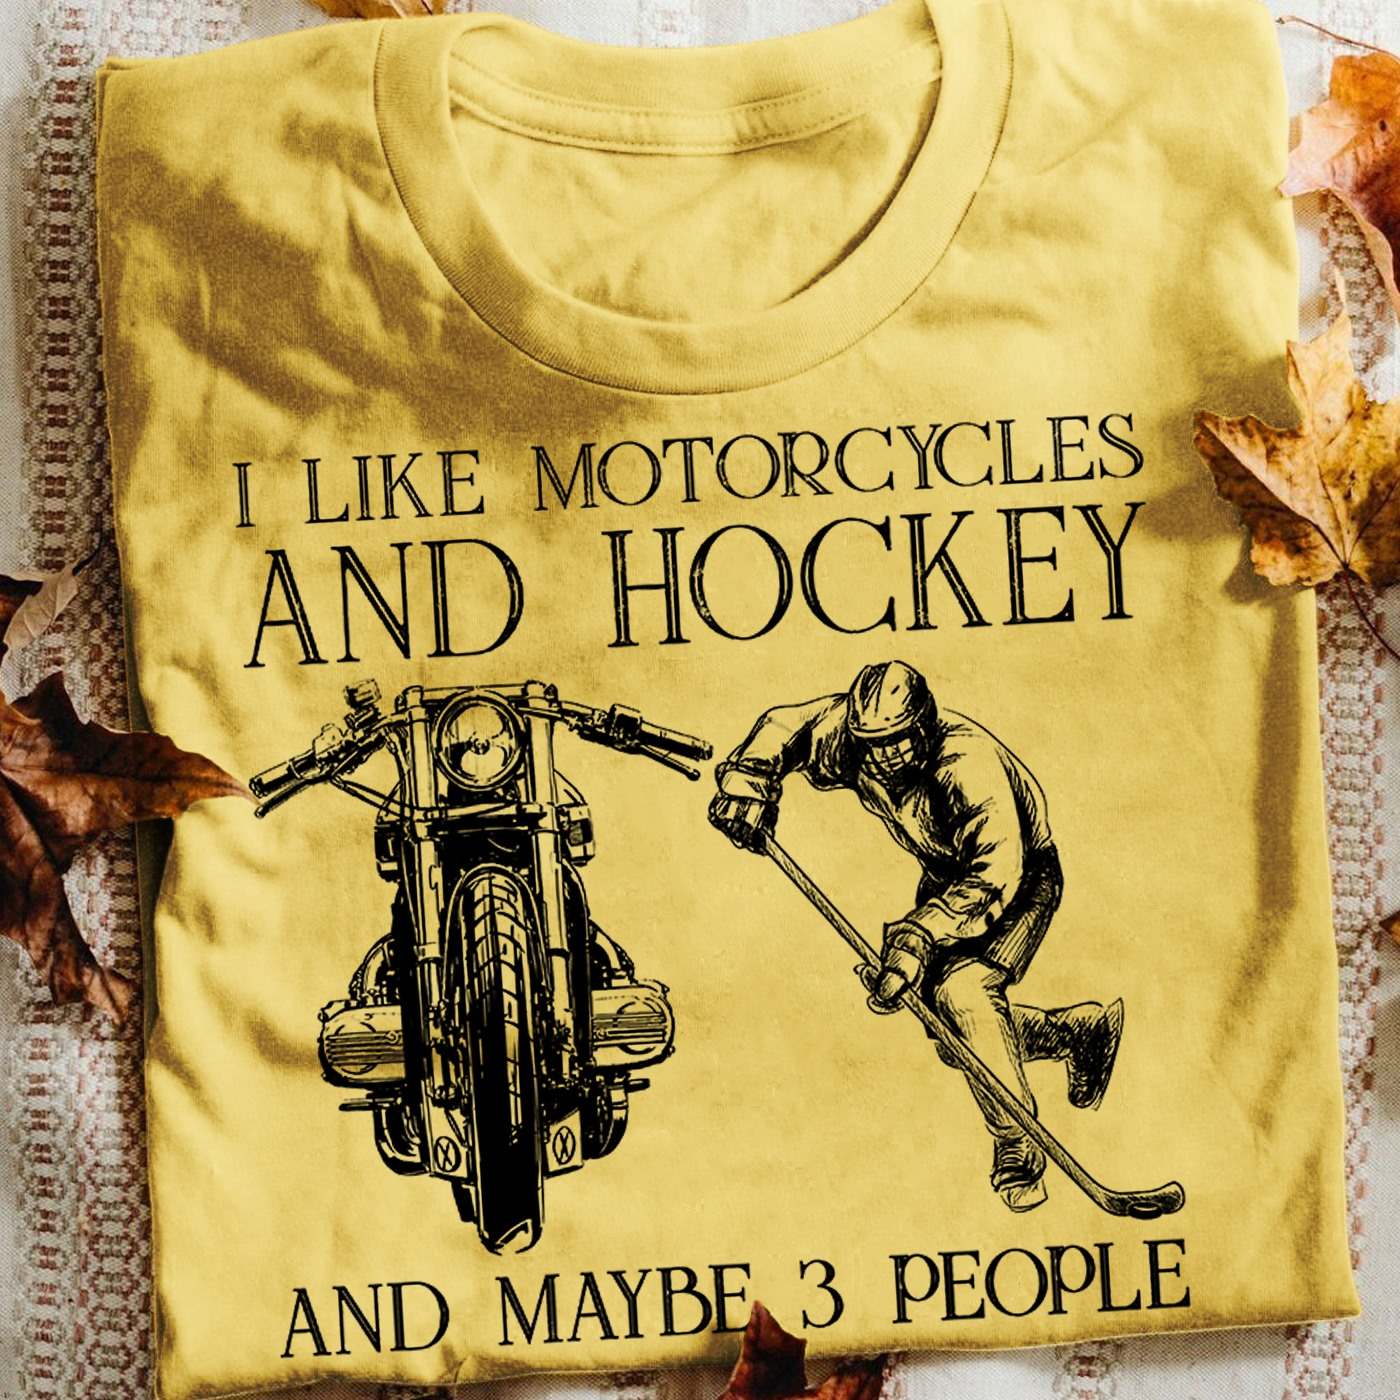 I like motorcycles and hockey and maybe 3 people - Man playing hockey